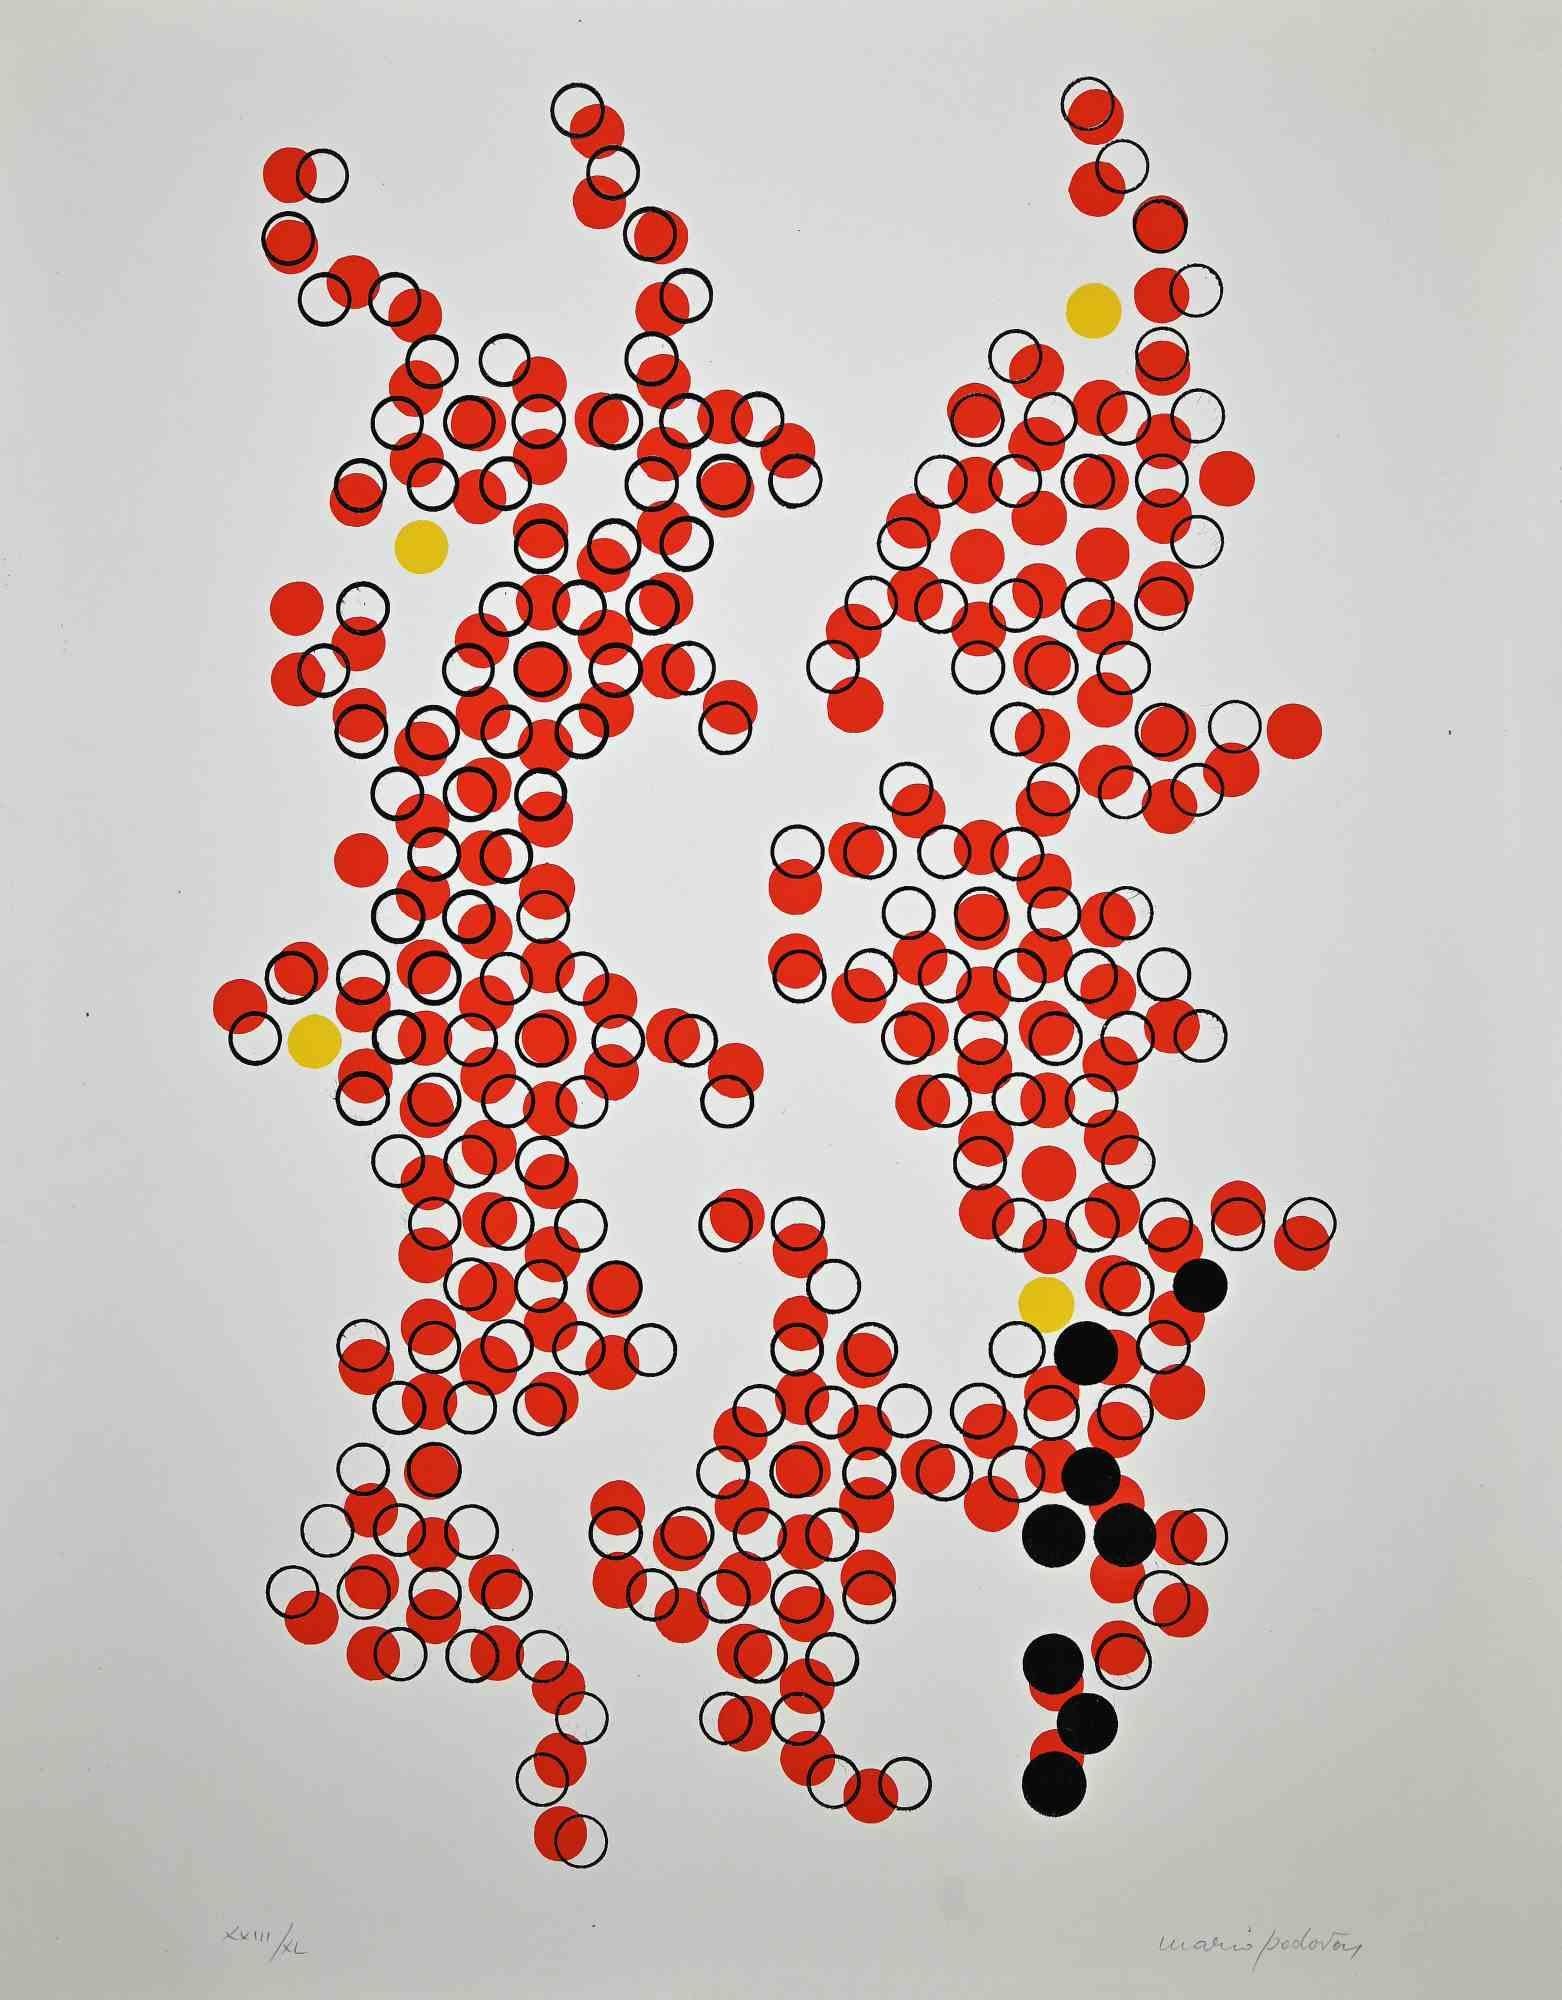 Disconnected Circles  is an original colored serigraph realized by Mario Padovan   in the  1970s .

Hand-signed in pencil on the lower right. Numbered in pencil on the lower left. Edition of 50.

Good conditions except for some light folds along the